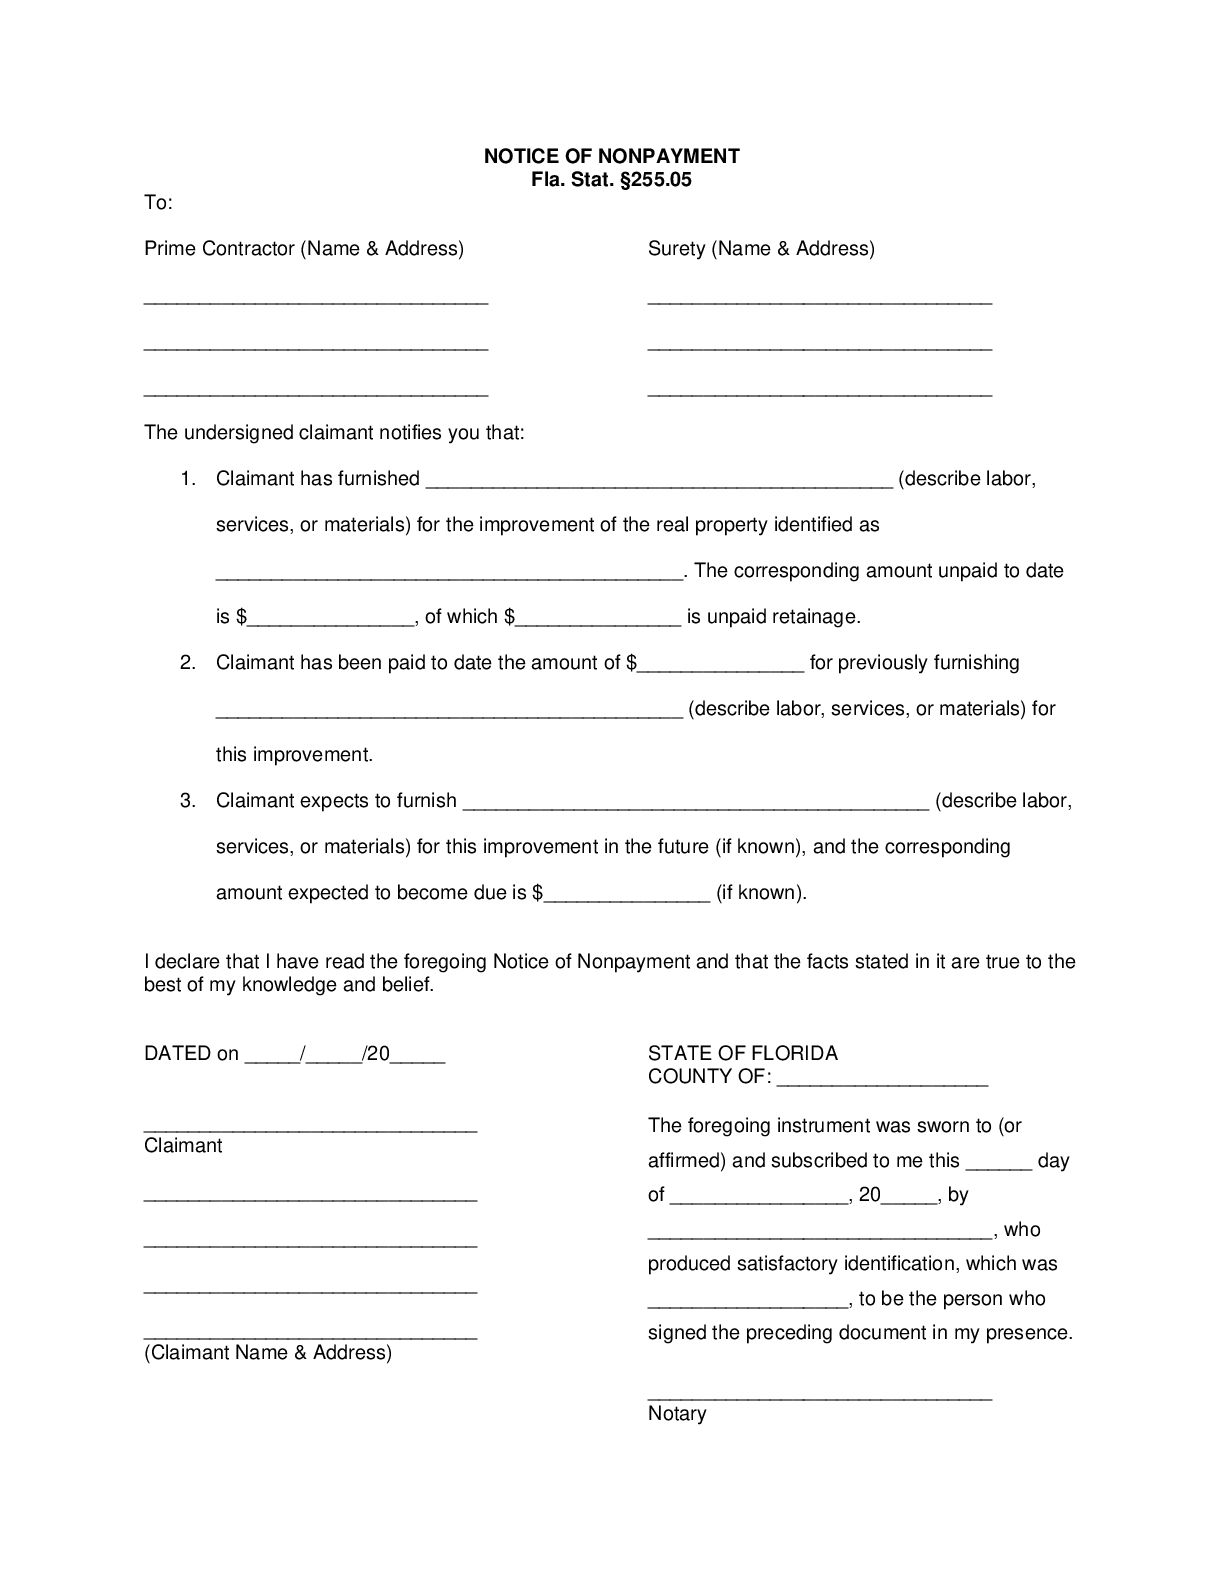 Florida Notice of Nonpayment Form (Public Bond Claim) | Free Template Download - free from